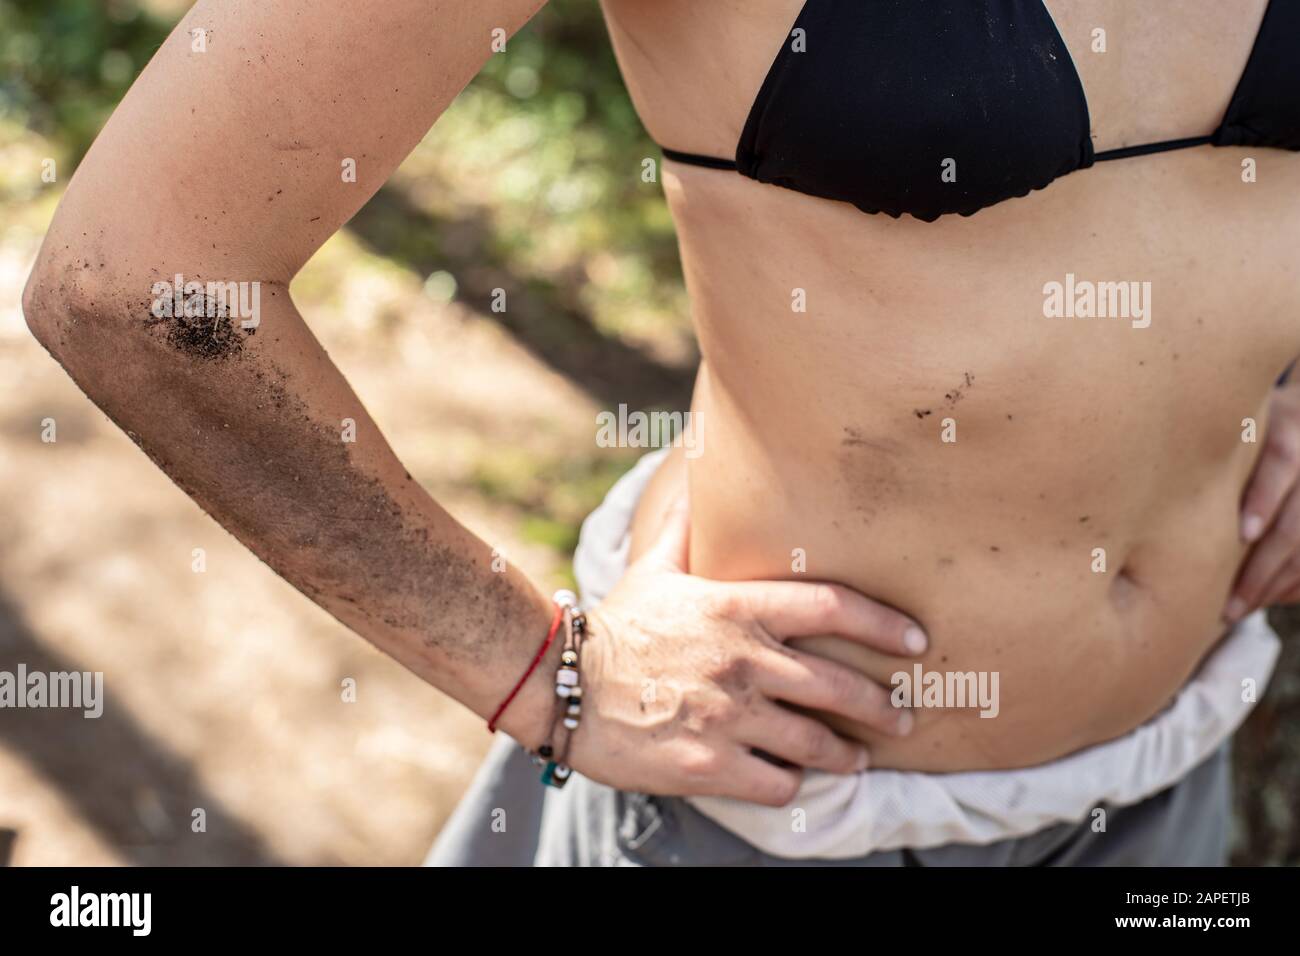 Female body, hand, stomach are dirty with earth and soot from a campfire, in a camp on a sunny summer day. Stock Photo